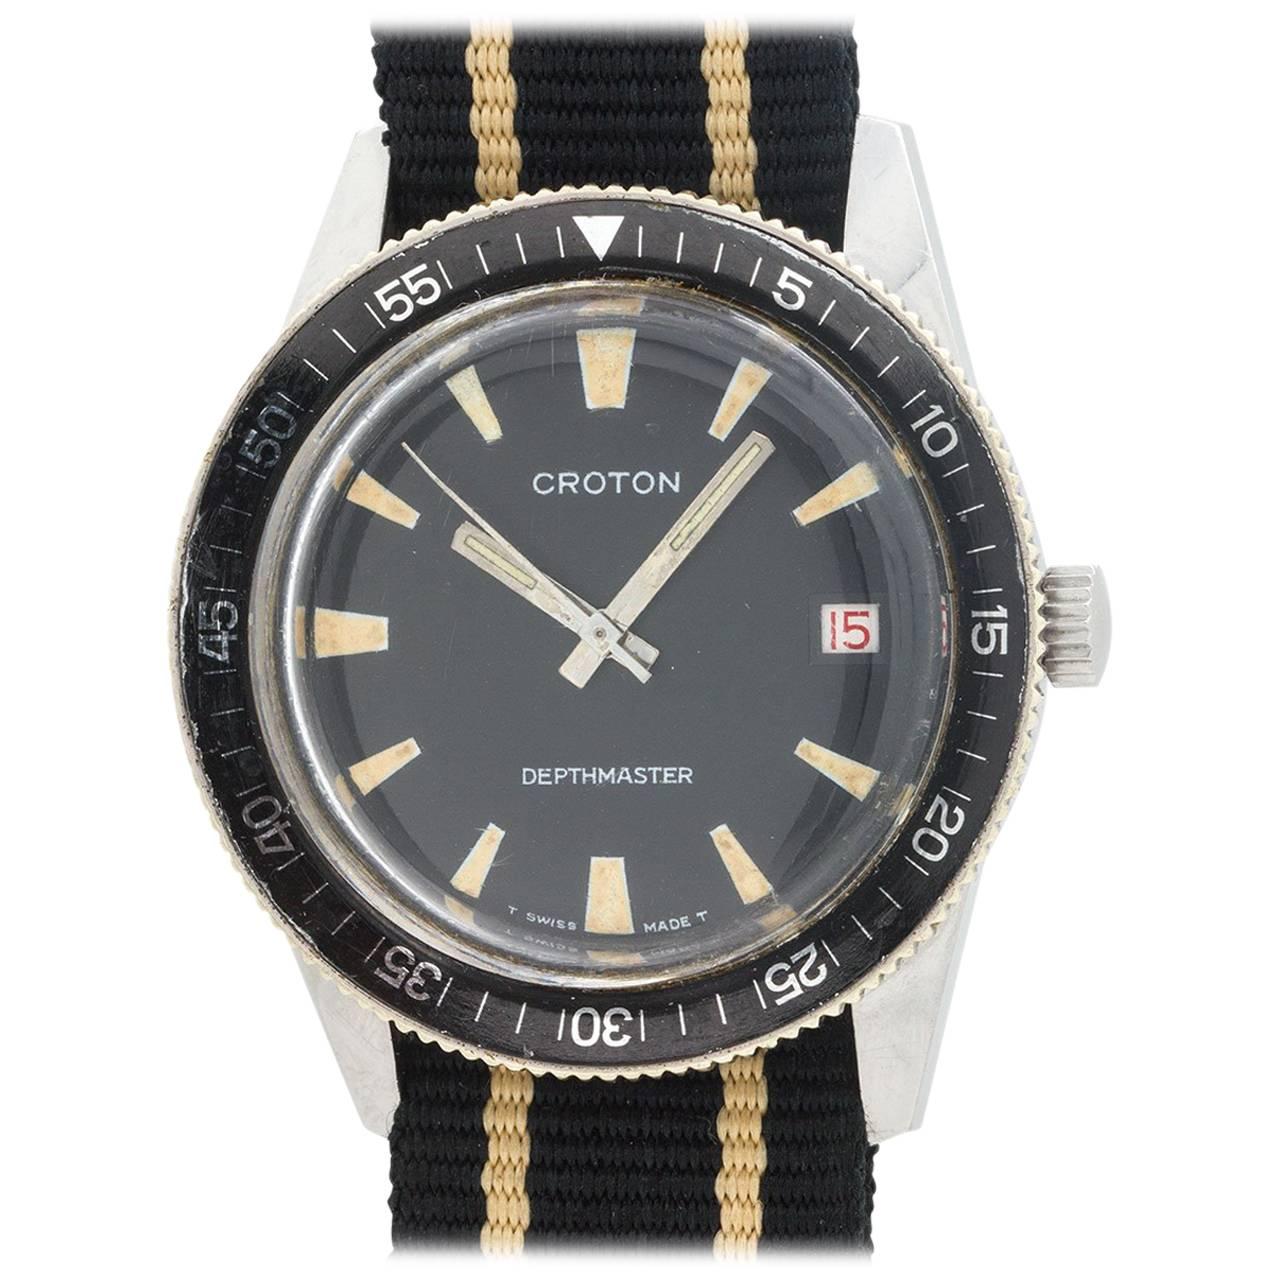 Croton Stainless Steel Diver’s self winding Wristwatch, circa 1960s